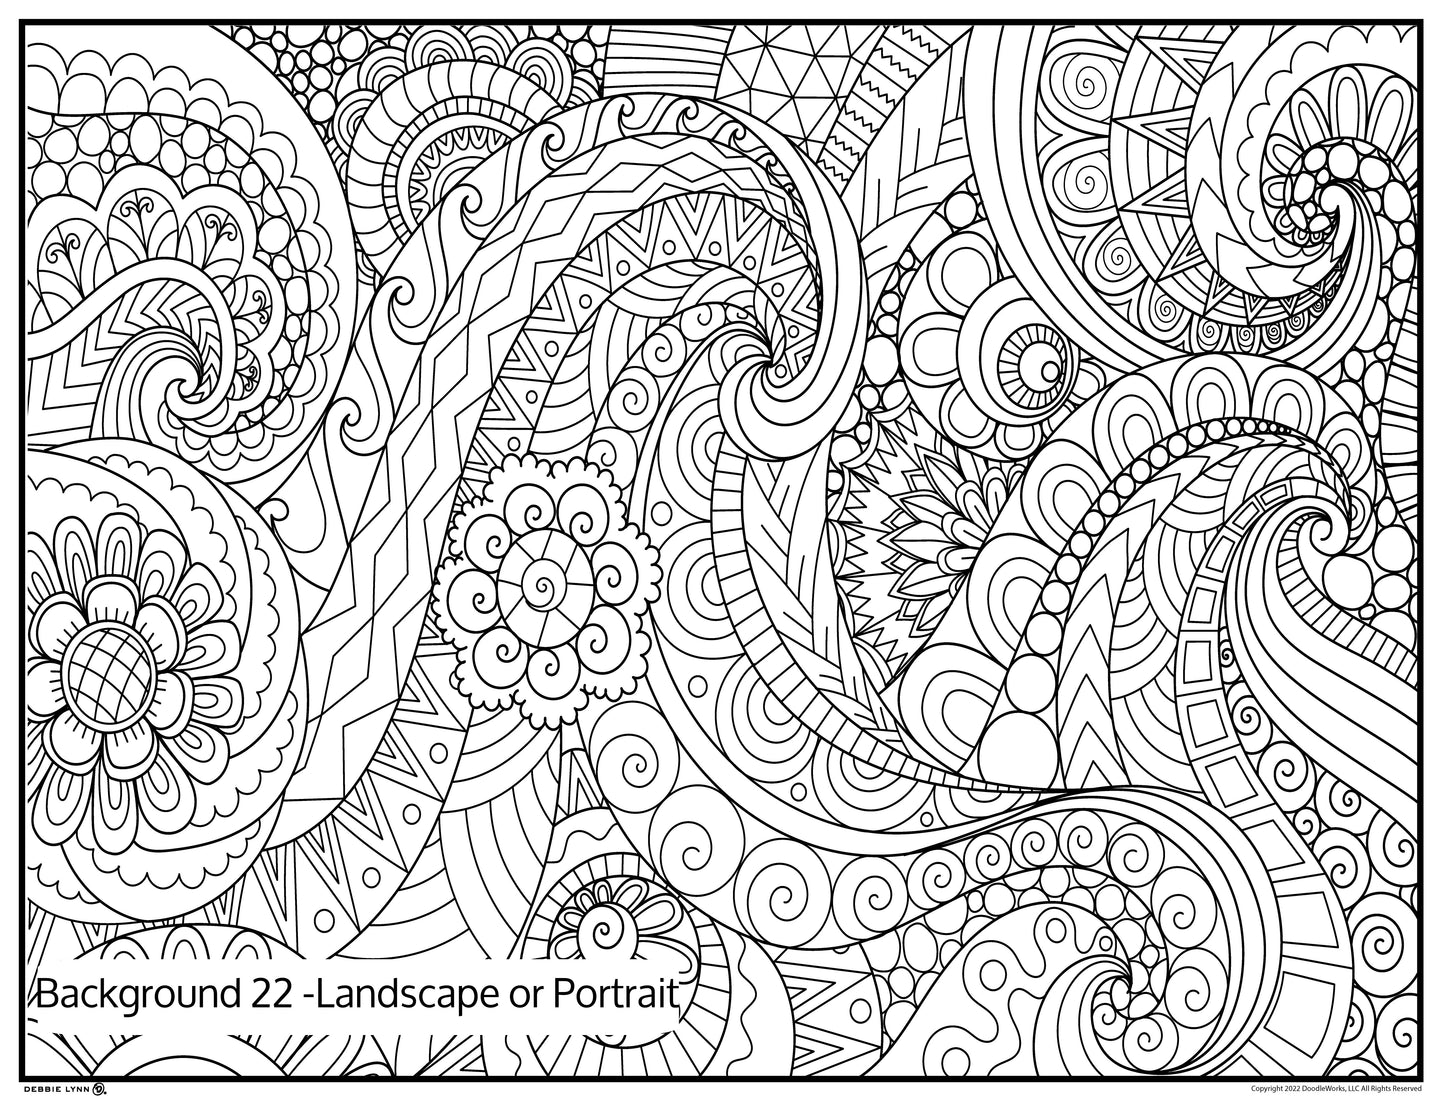 Background 22 Custom Personalized Giant Coloring Poster 46"x60"